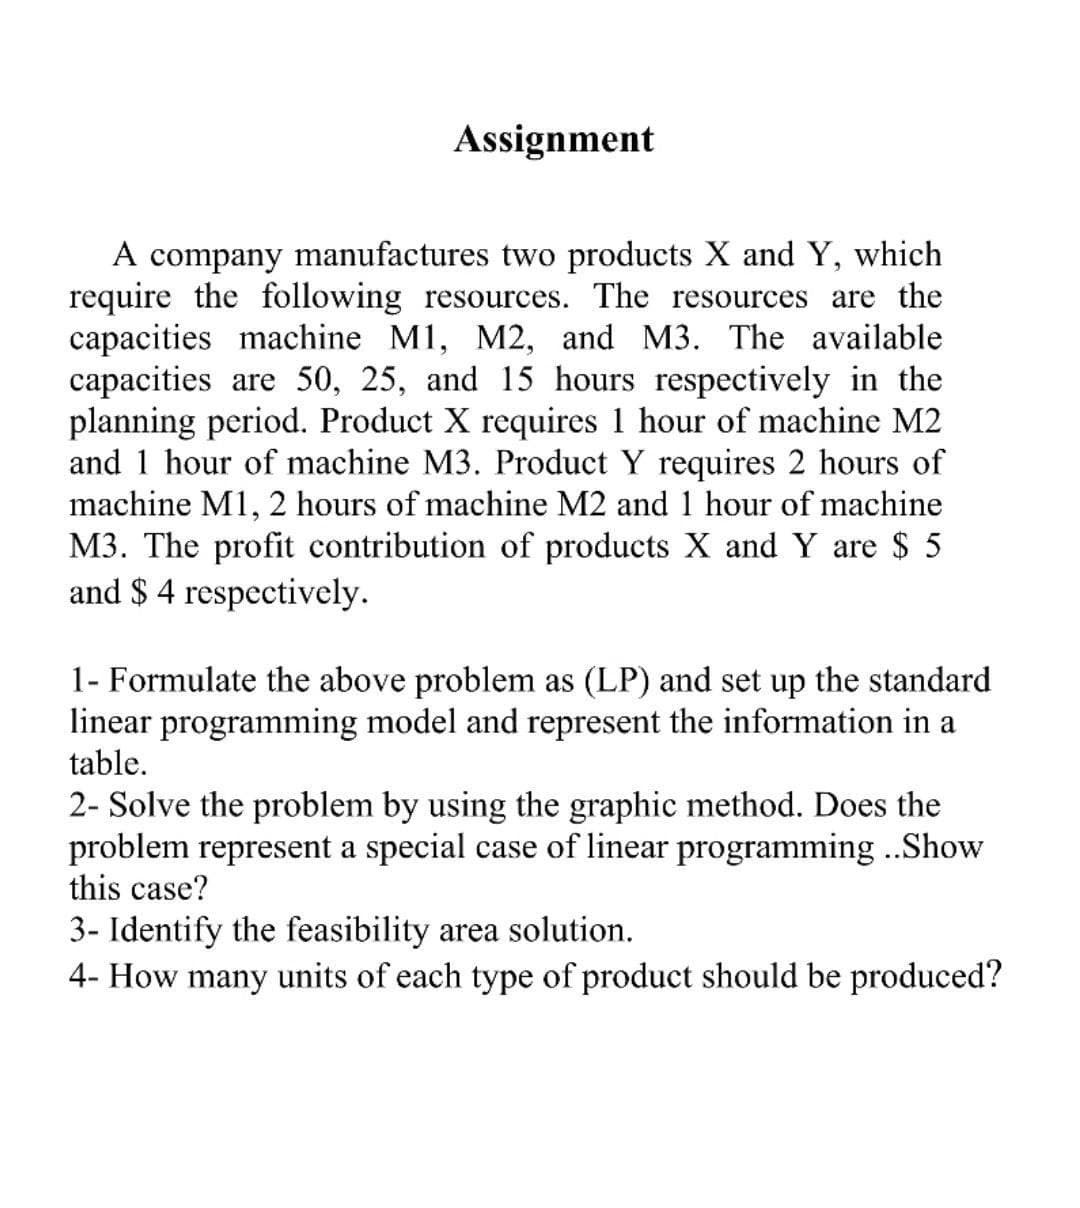 Assignment
A company manufactures two products X and Y, which
require the following resources. The resources are the
capacities machine M1, M2, and M3. The available
capacities are 50, 25, and 15 hours respectively in the
planning period. Product X requires 1 hour of machine M2
and 1 hor
of machine M3. Product Y requires 2 hours of
machine M1, 2 hours of machine M2 and 1 hour of machine
M3. The profit contribution of products X and Y are $ 5
and $ 4 respectively.
1- Formulate the above problem as (LP) and set up the standard
linear programming model and represent the information in a
table.
2- Solve the problem by using the graphic method. Does the
problem represent a special case of linear programming ..Show
this case?
3- Identify the feasibility area solution.
4- How many units of each type of product should be produced?
